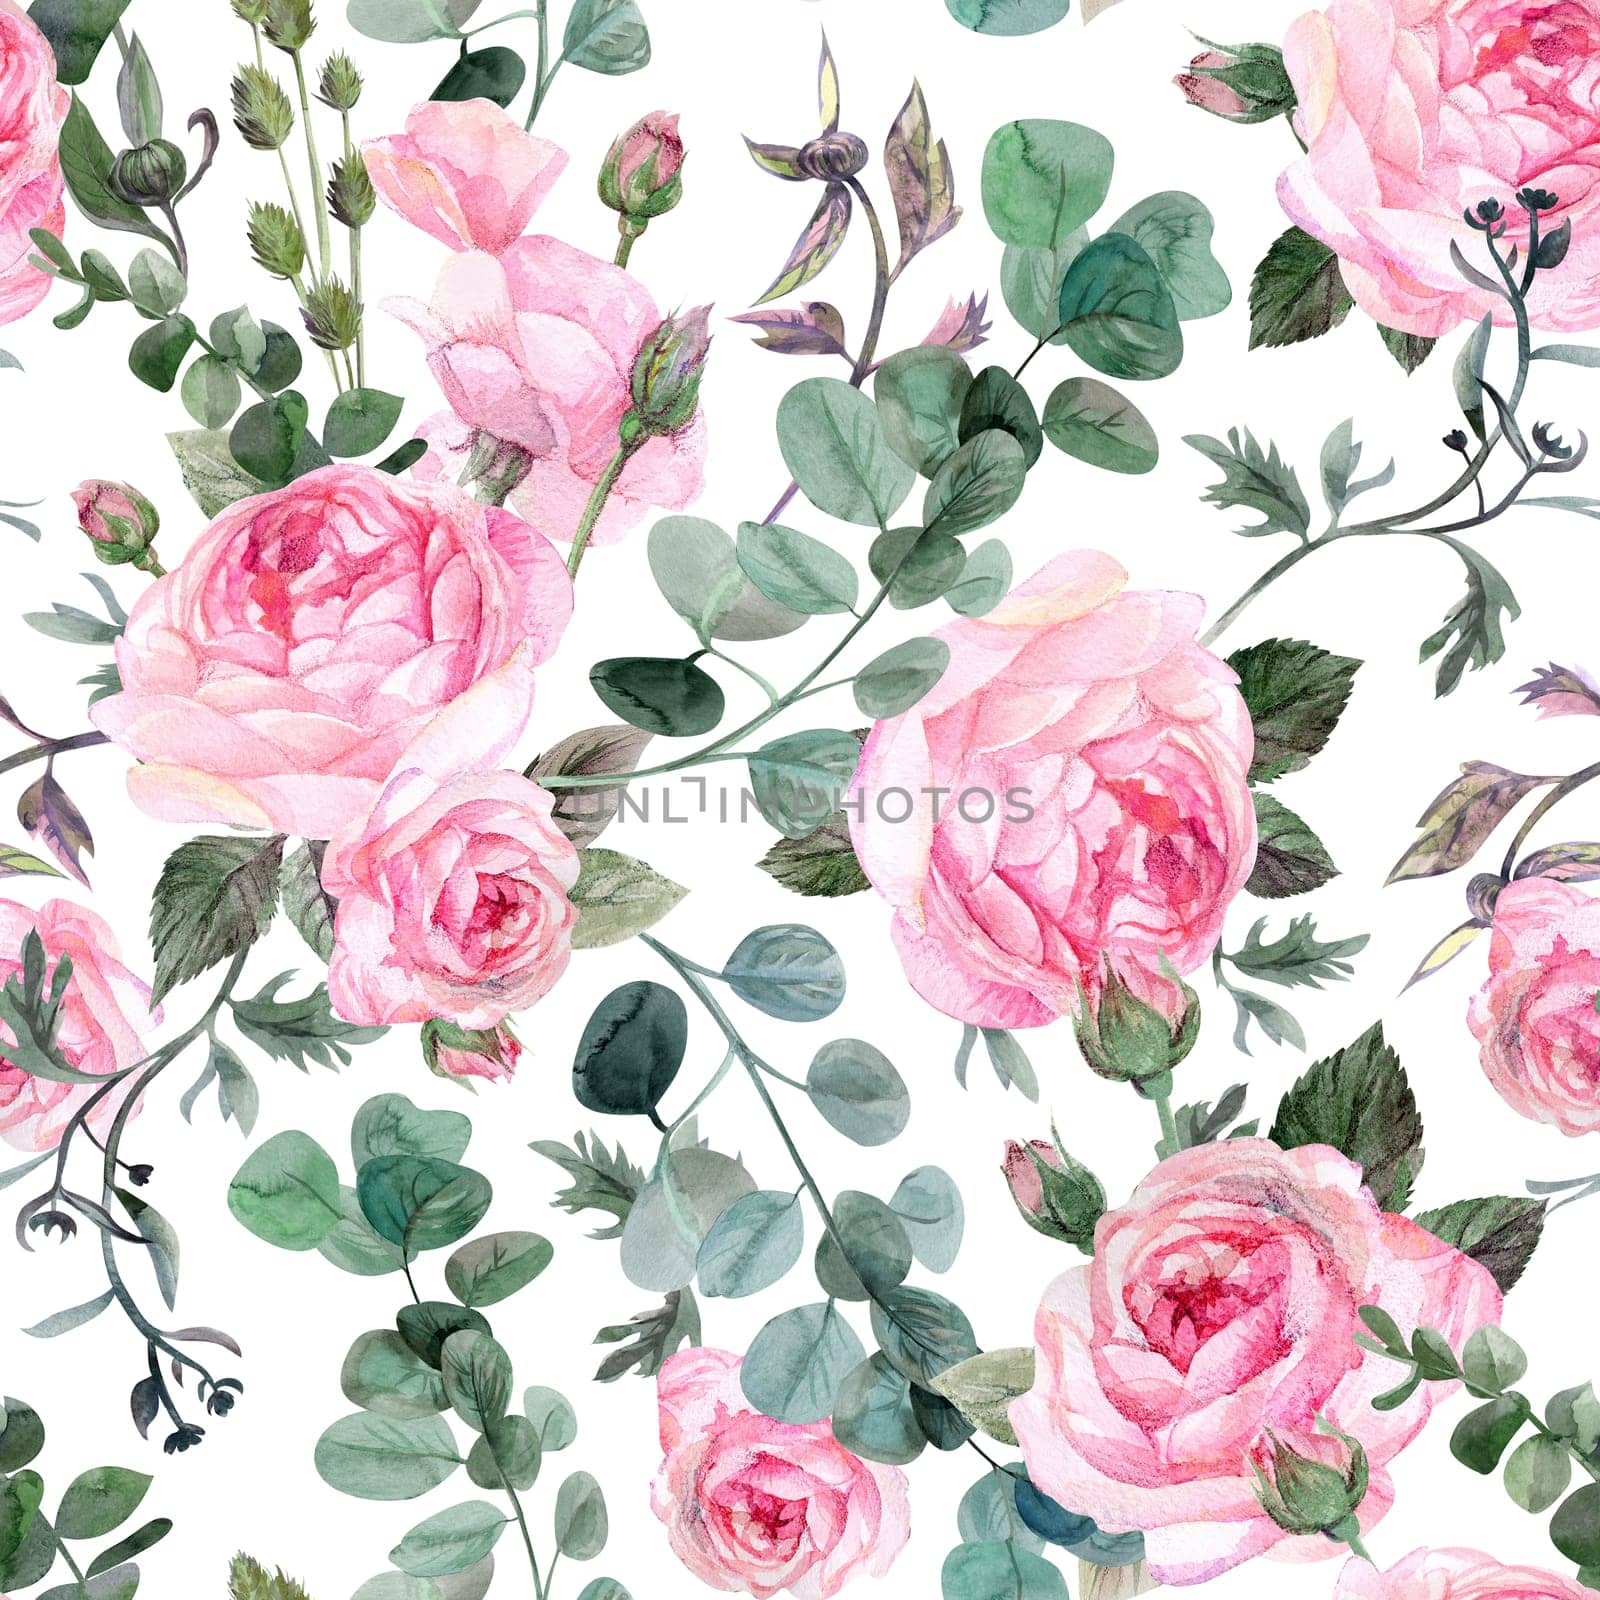 Vintage seamless pattern with delicate roses and branches on a white background for textiles and retro designs